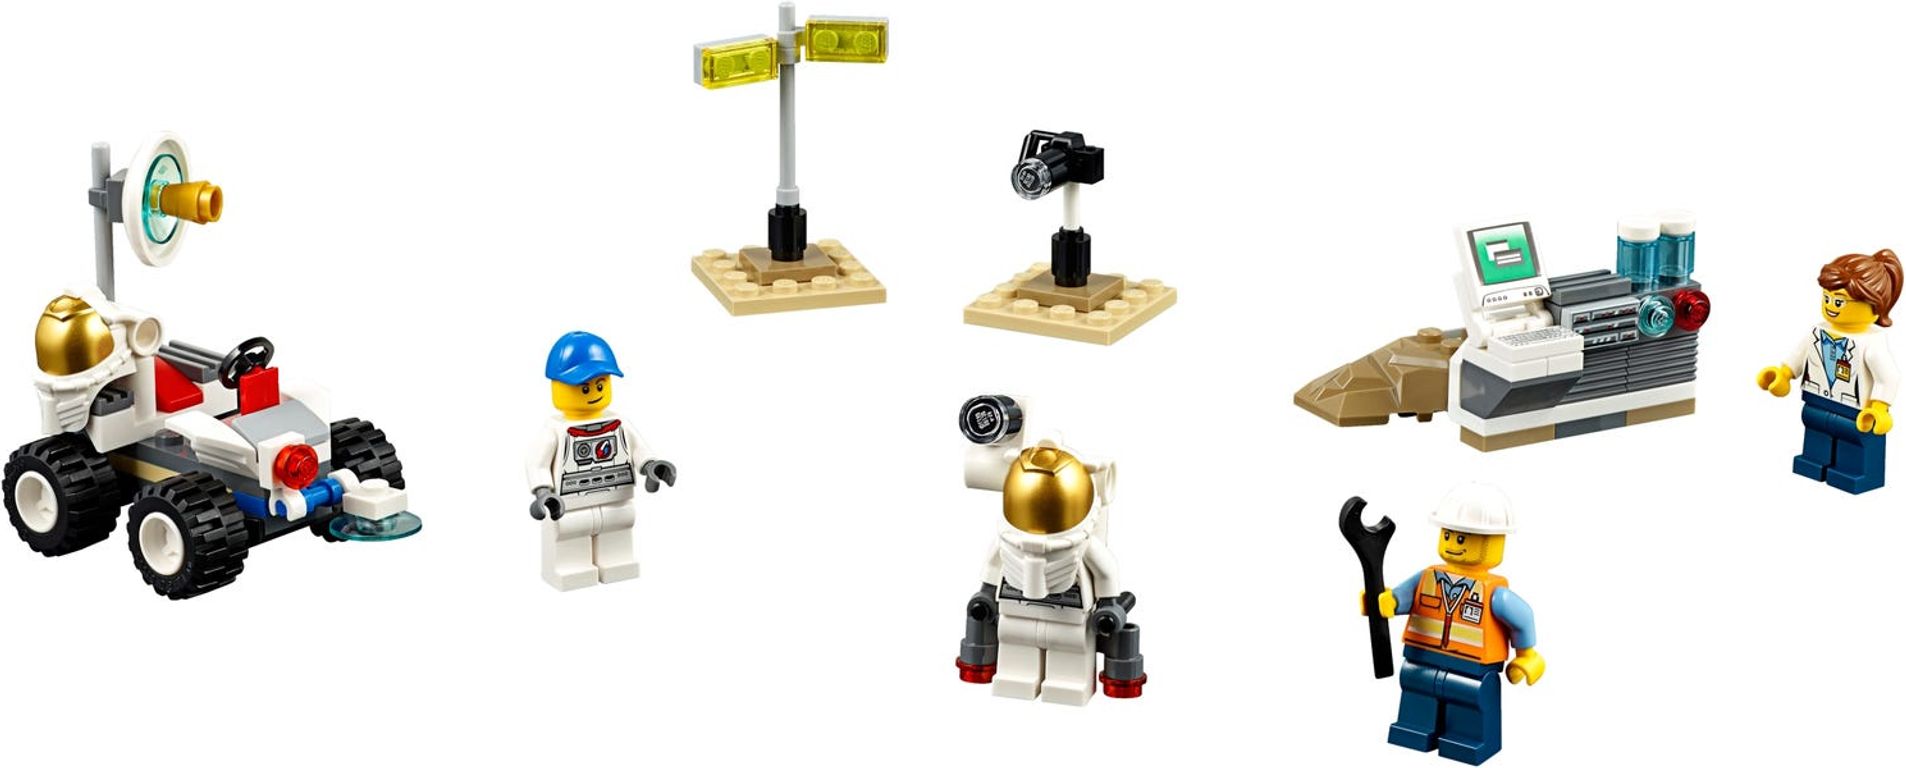 LEGO® City Space Starter Set components